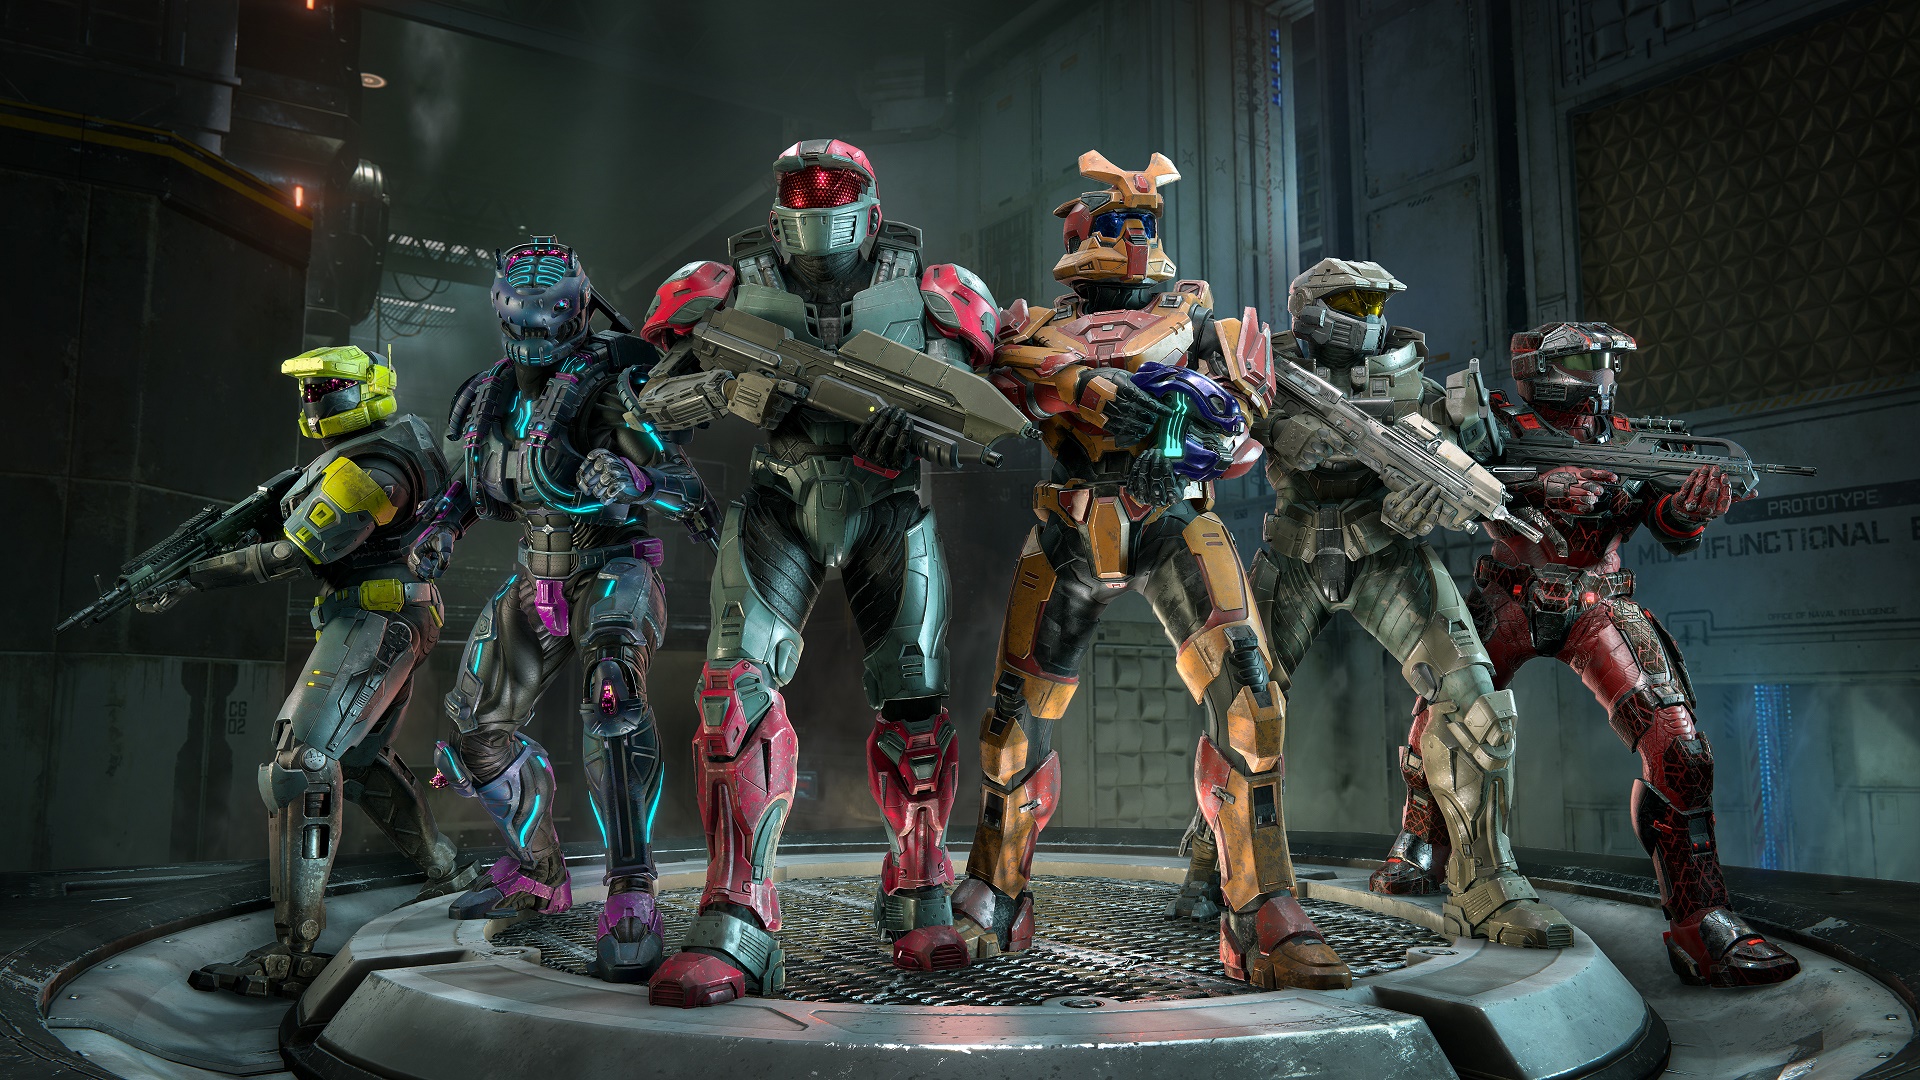 Halo infinite image showing six Spartans clad in new customization items from CU29